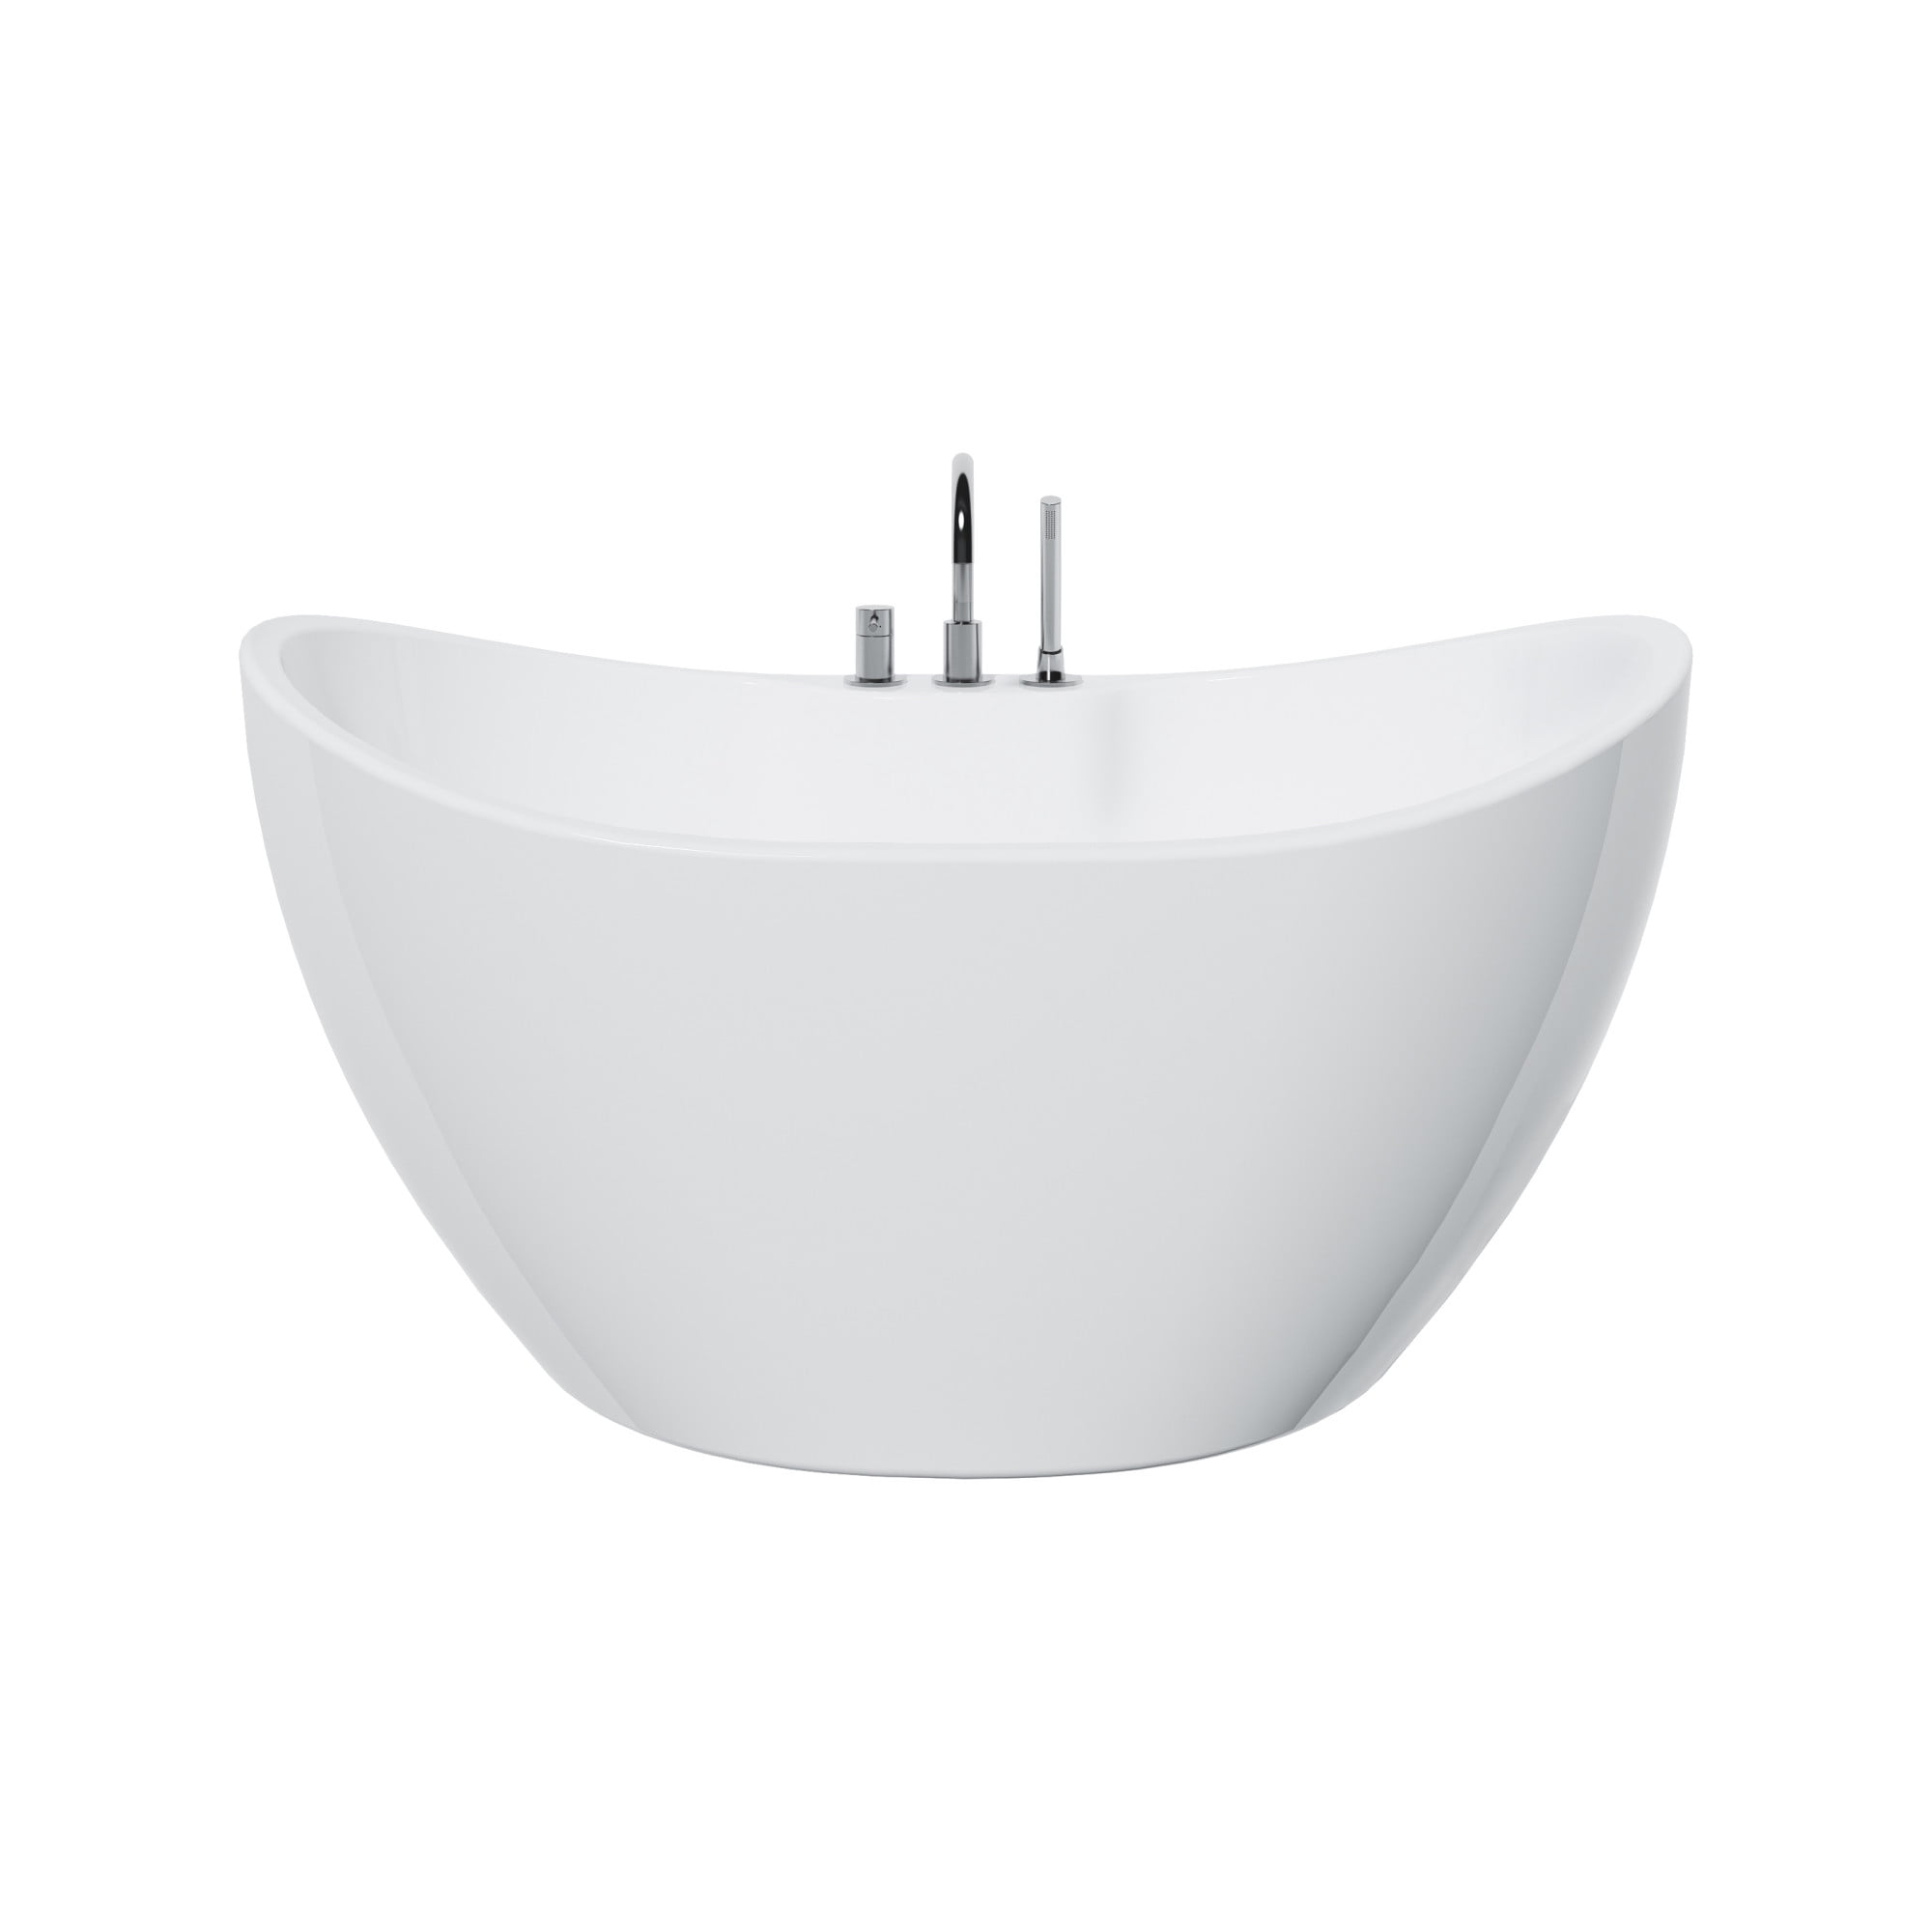 Picture of A&E Bath & Shower BT-1032-56-NF 56 in. Turin-56-No Faucet Freestanding Bathtub